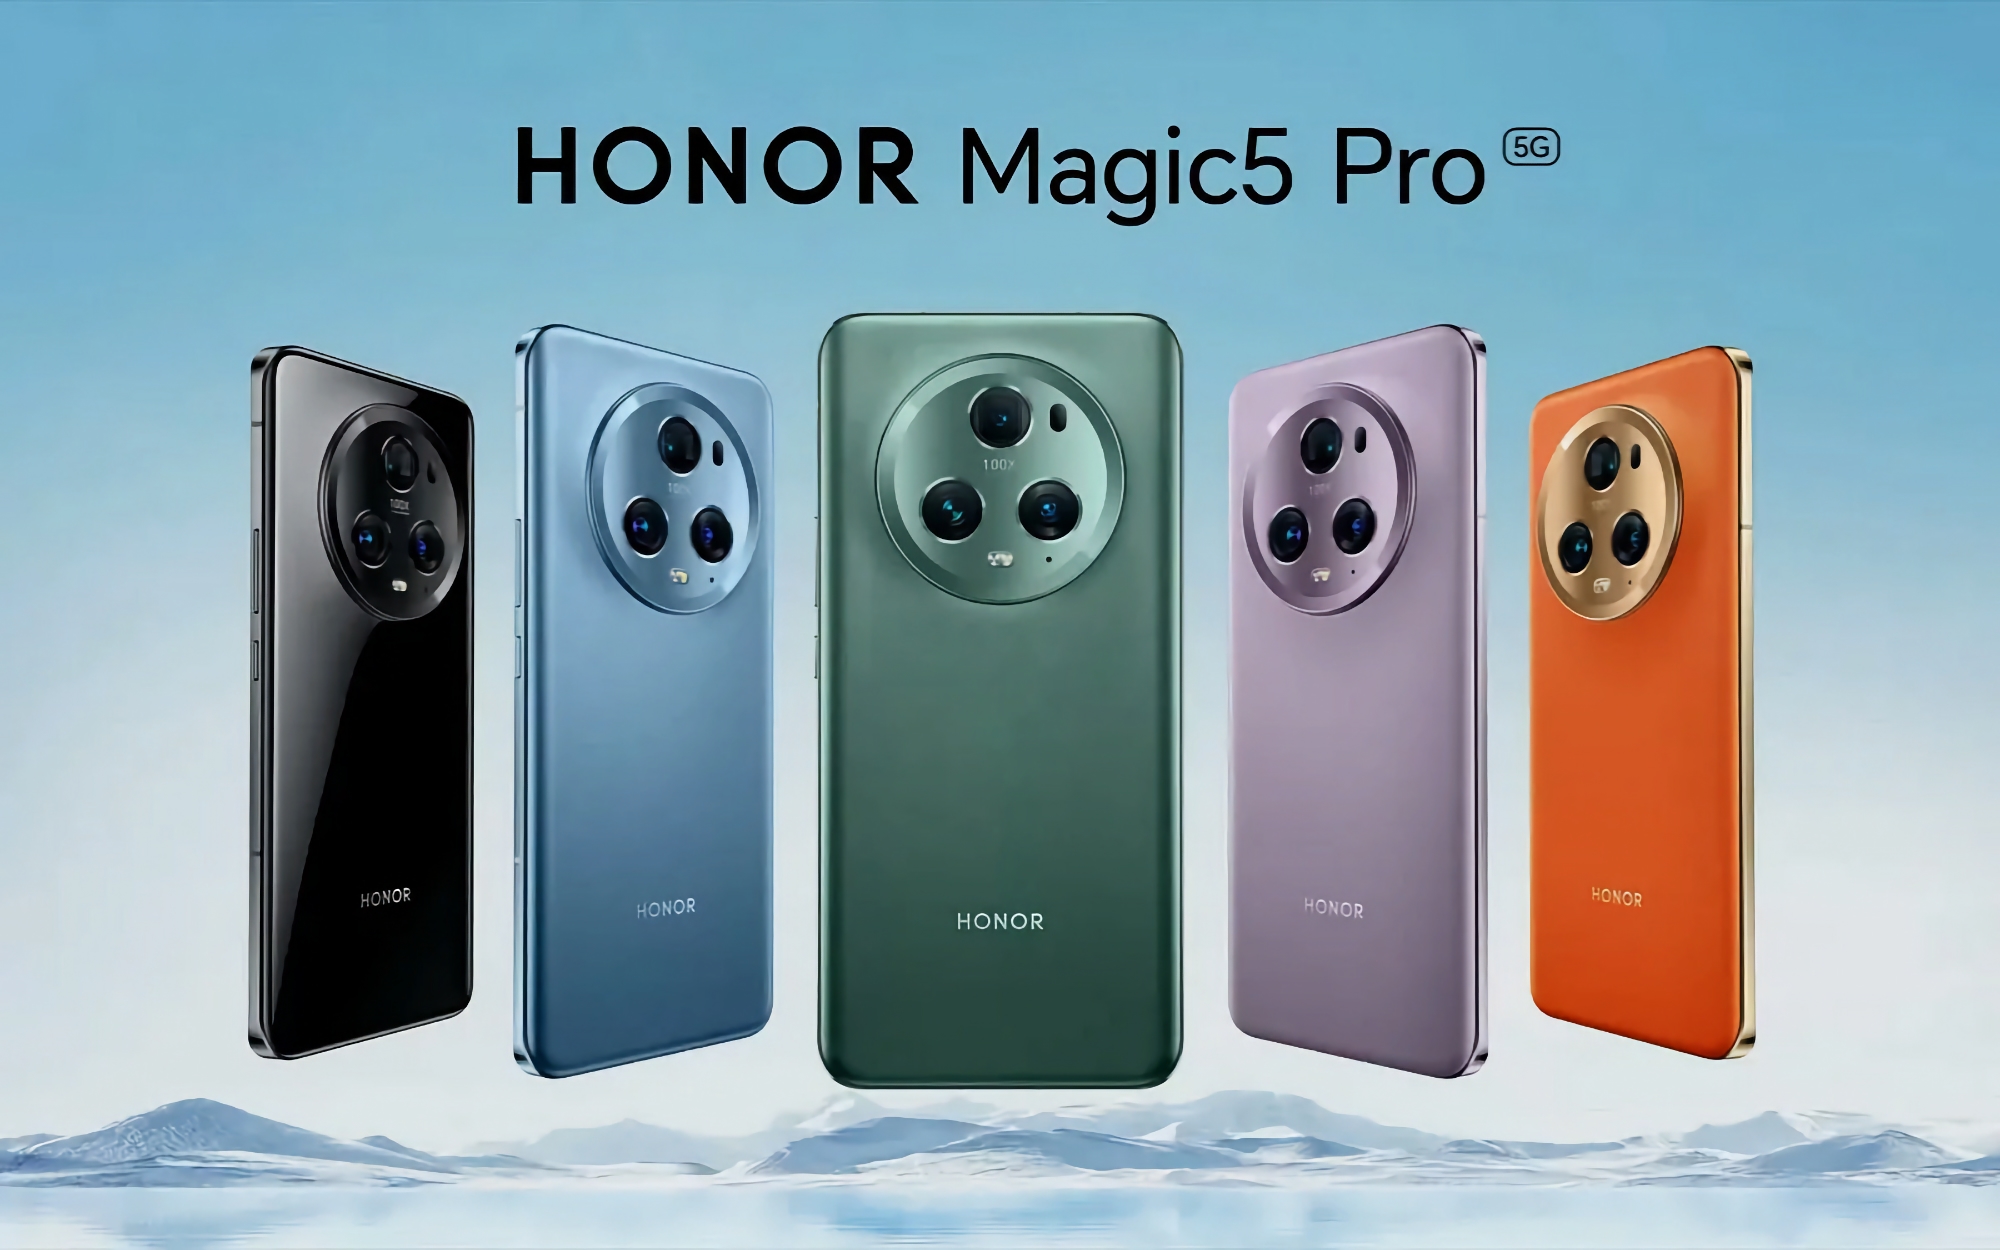 Honor Magic 5 Pro users in the global market have started receiving MagicOS 8.0 based on Android 14